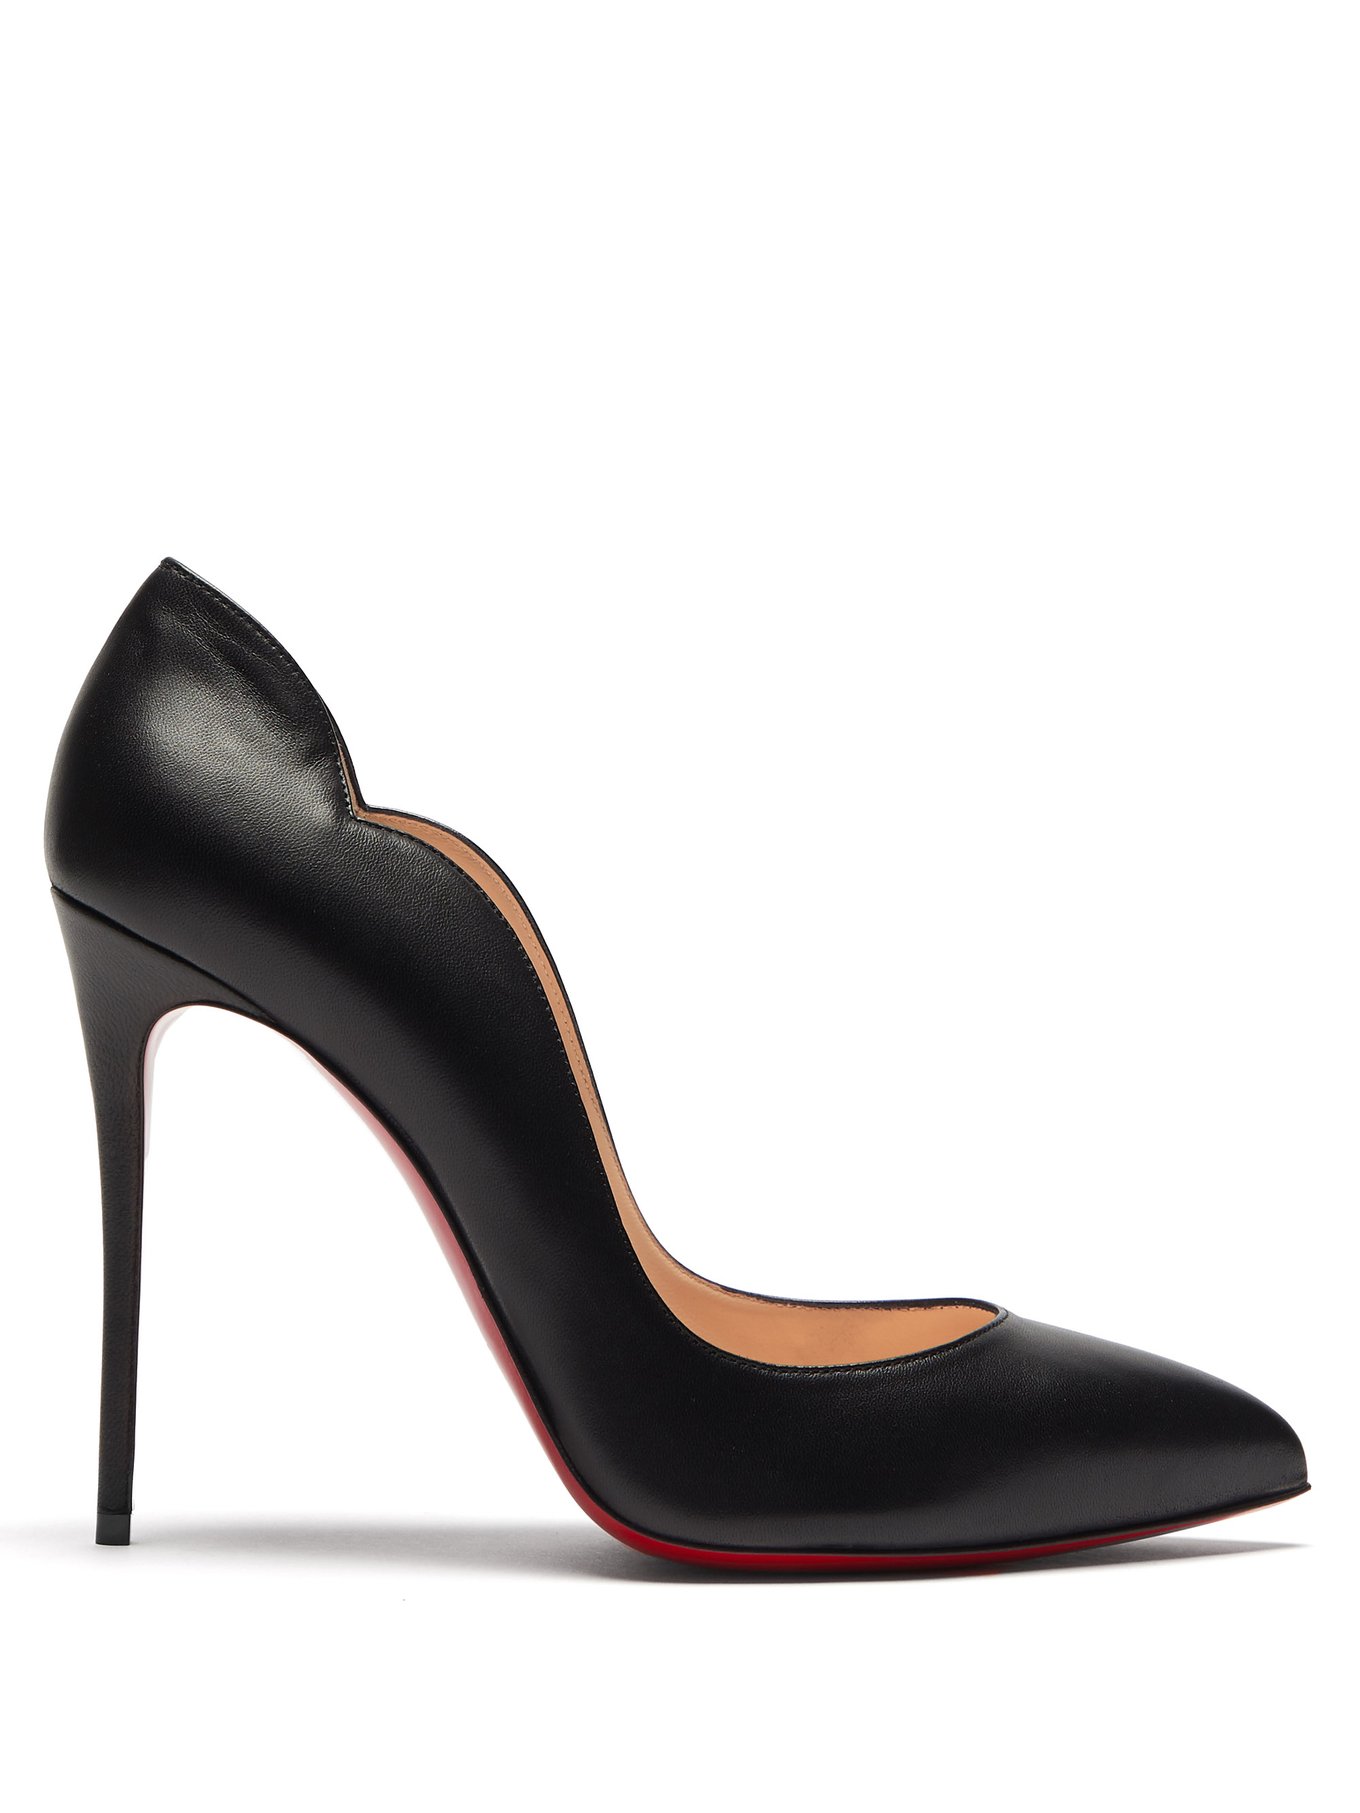 Neutral Hot Chick 100 scalloped patent-leather pumps, Christian Louboutin